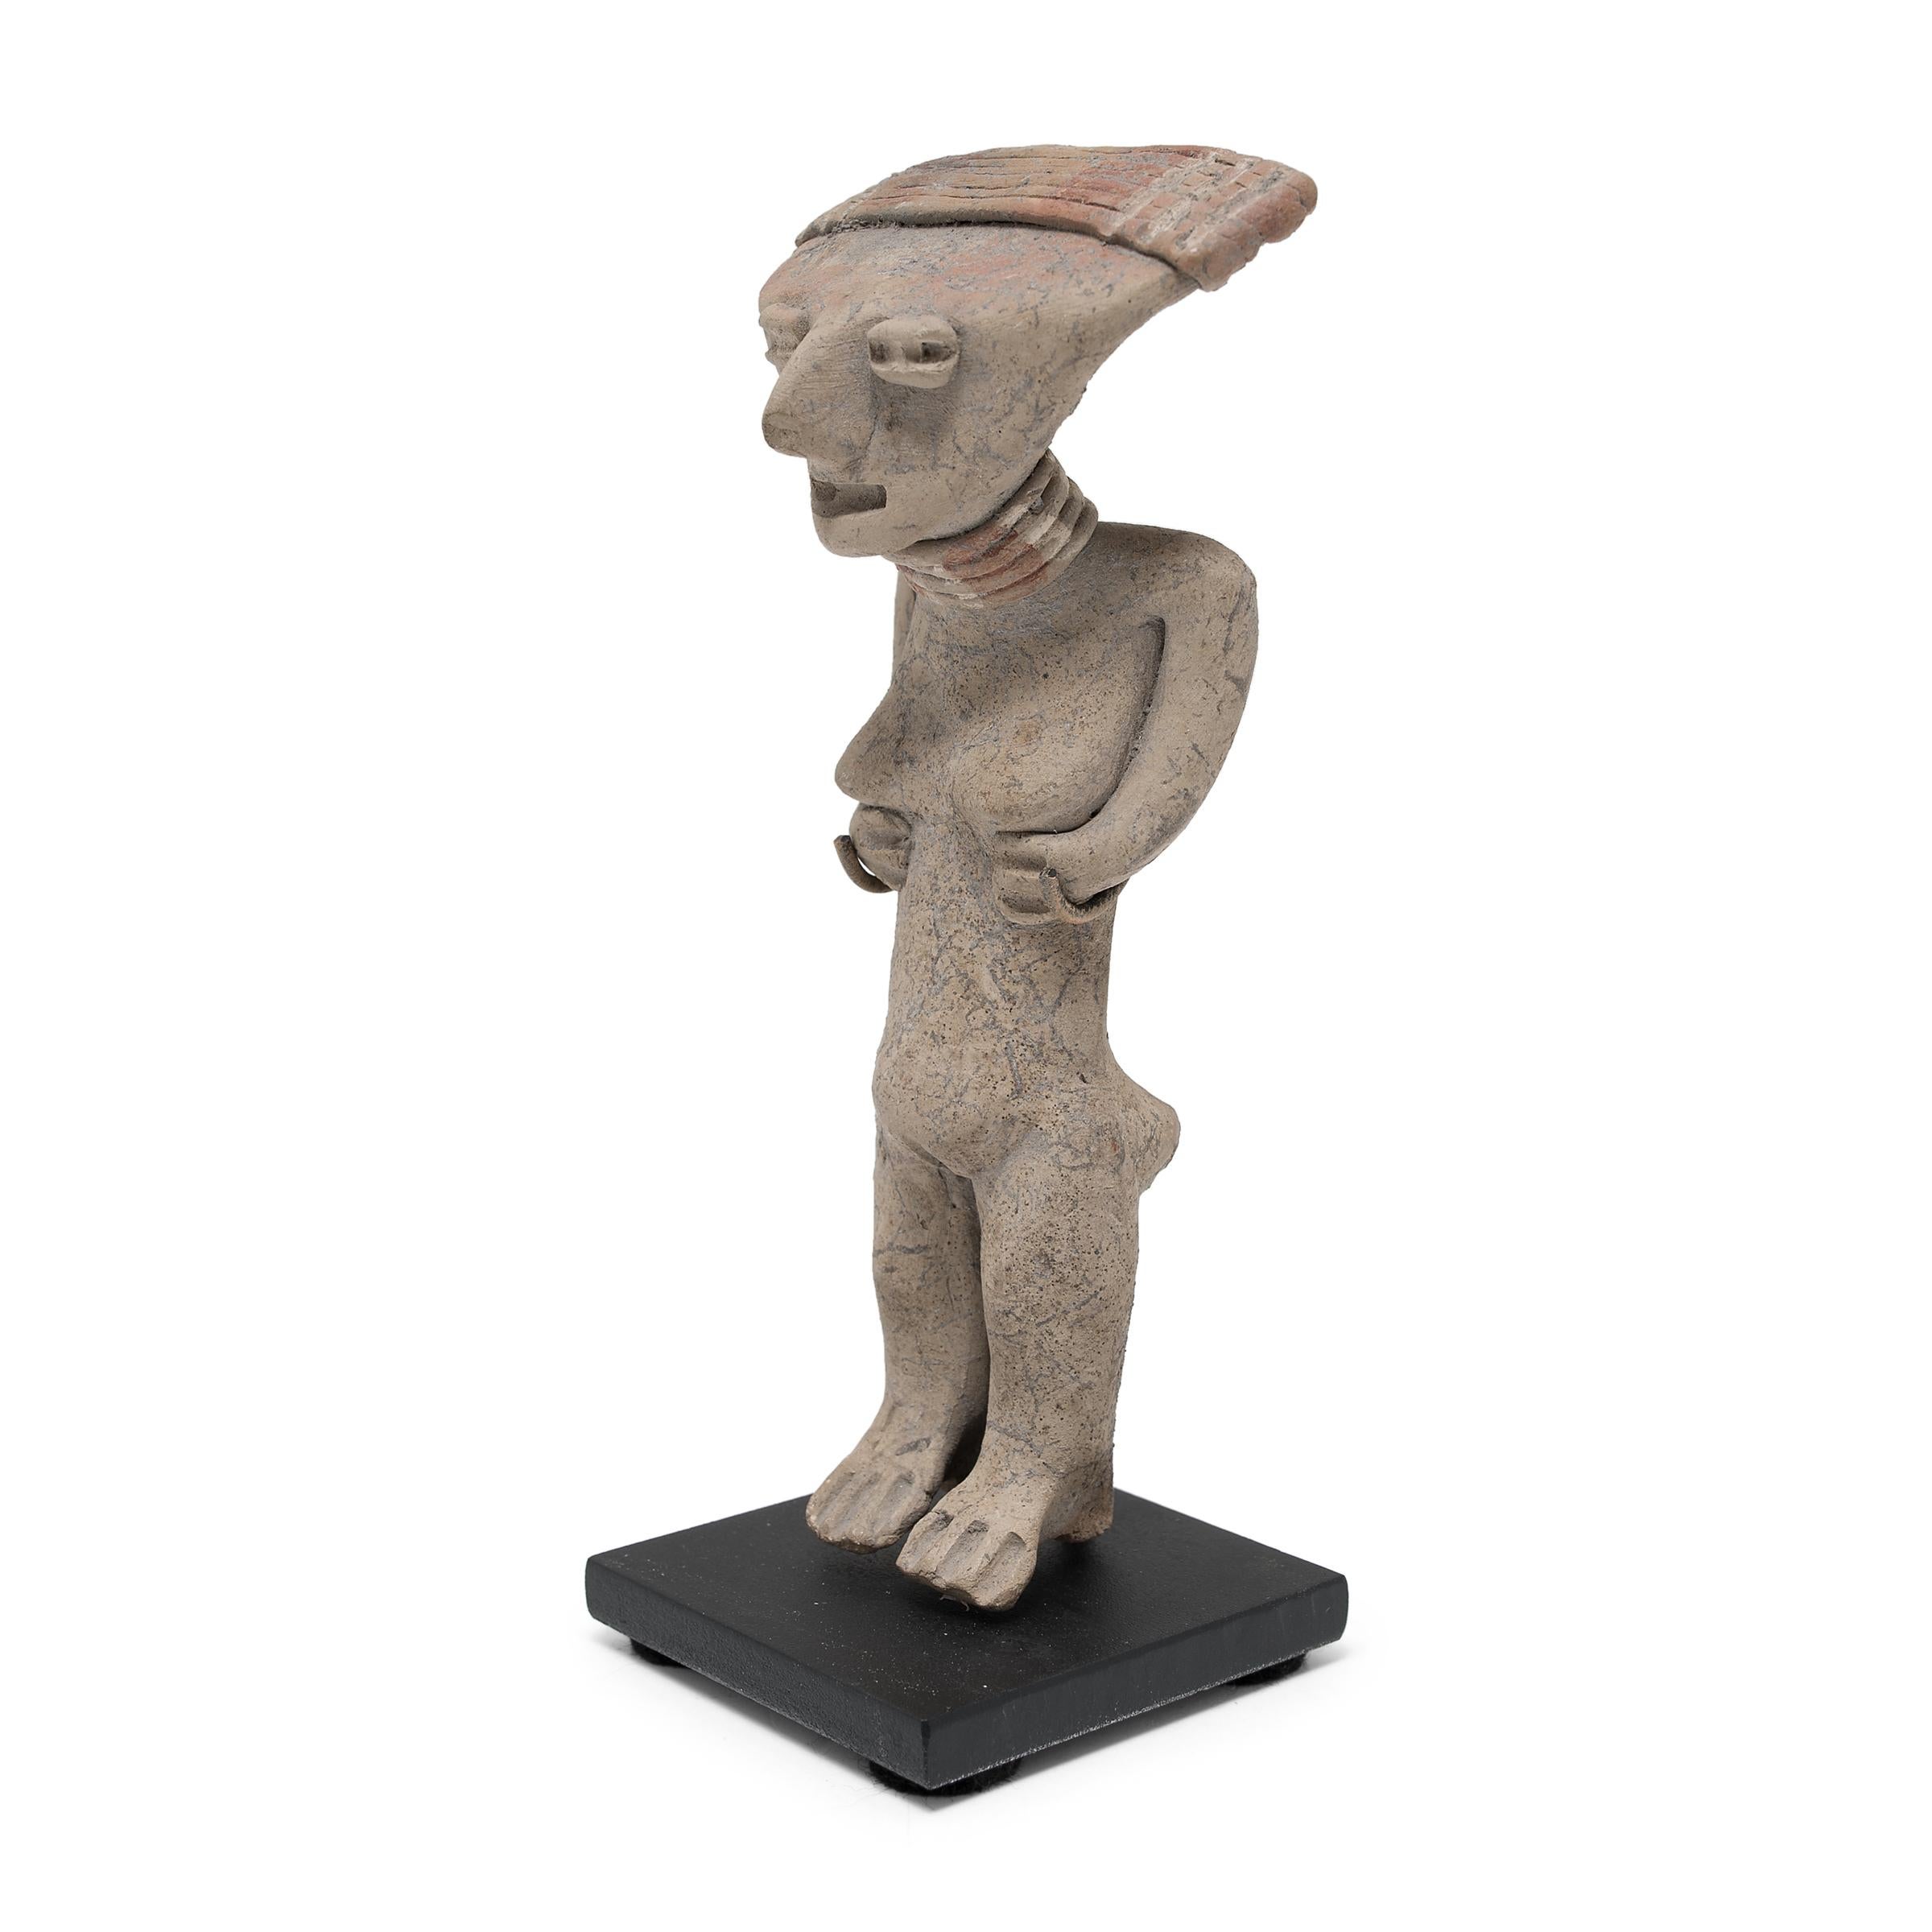 This standing female figure was crafted in 400-100 BC from the ancient Chupicuaro region of Mexico. The ceramic works of the Chupicuaro people are distinguished by their slanted, coffee-bean shaped eyes and flattened features. This particular